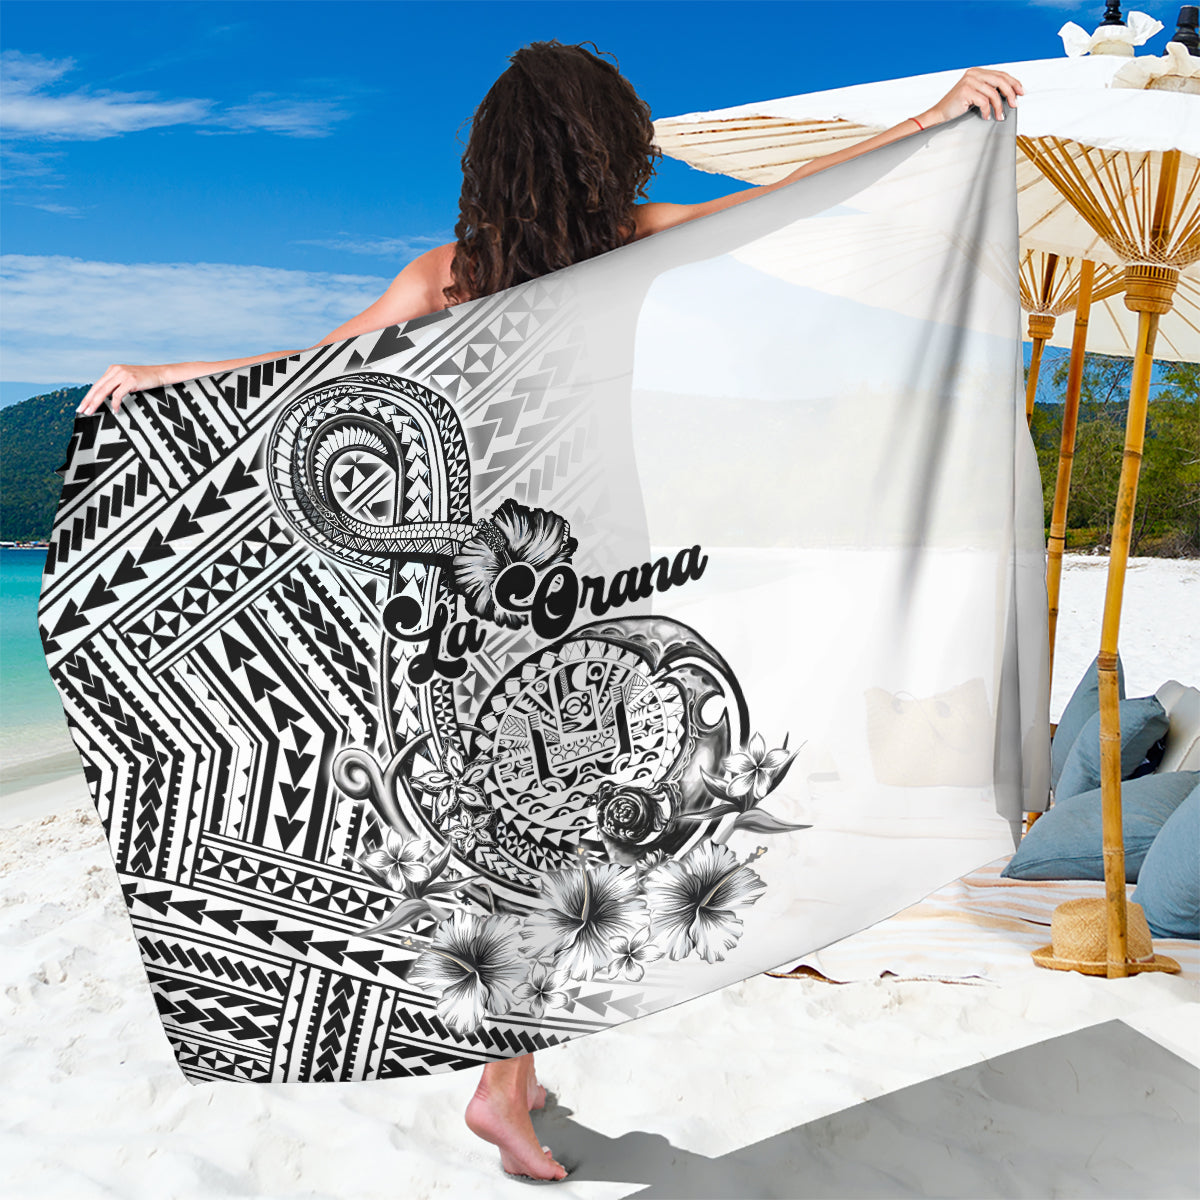 La Orana Tahiti Personalised Sarong French Polynesia Hook Tattoo Special White Color LT9 One Size 44 x 66 inches White - Polynesian Pride